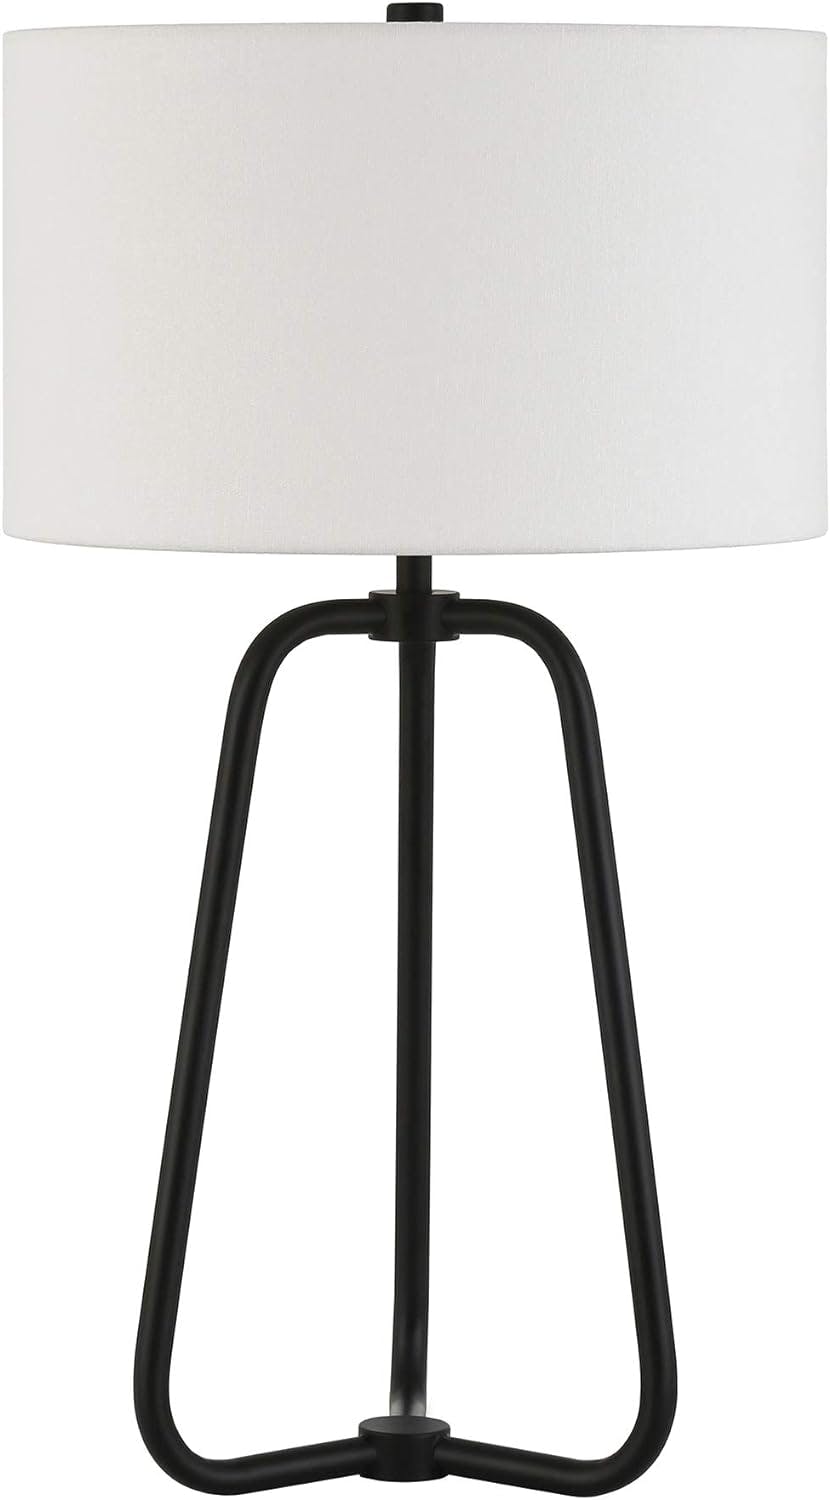 Marduk 25.5" Blackened Bronze Table Lamp with Linen Shade